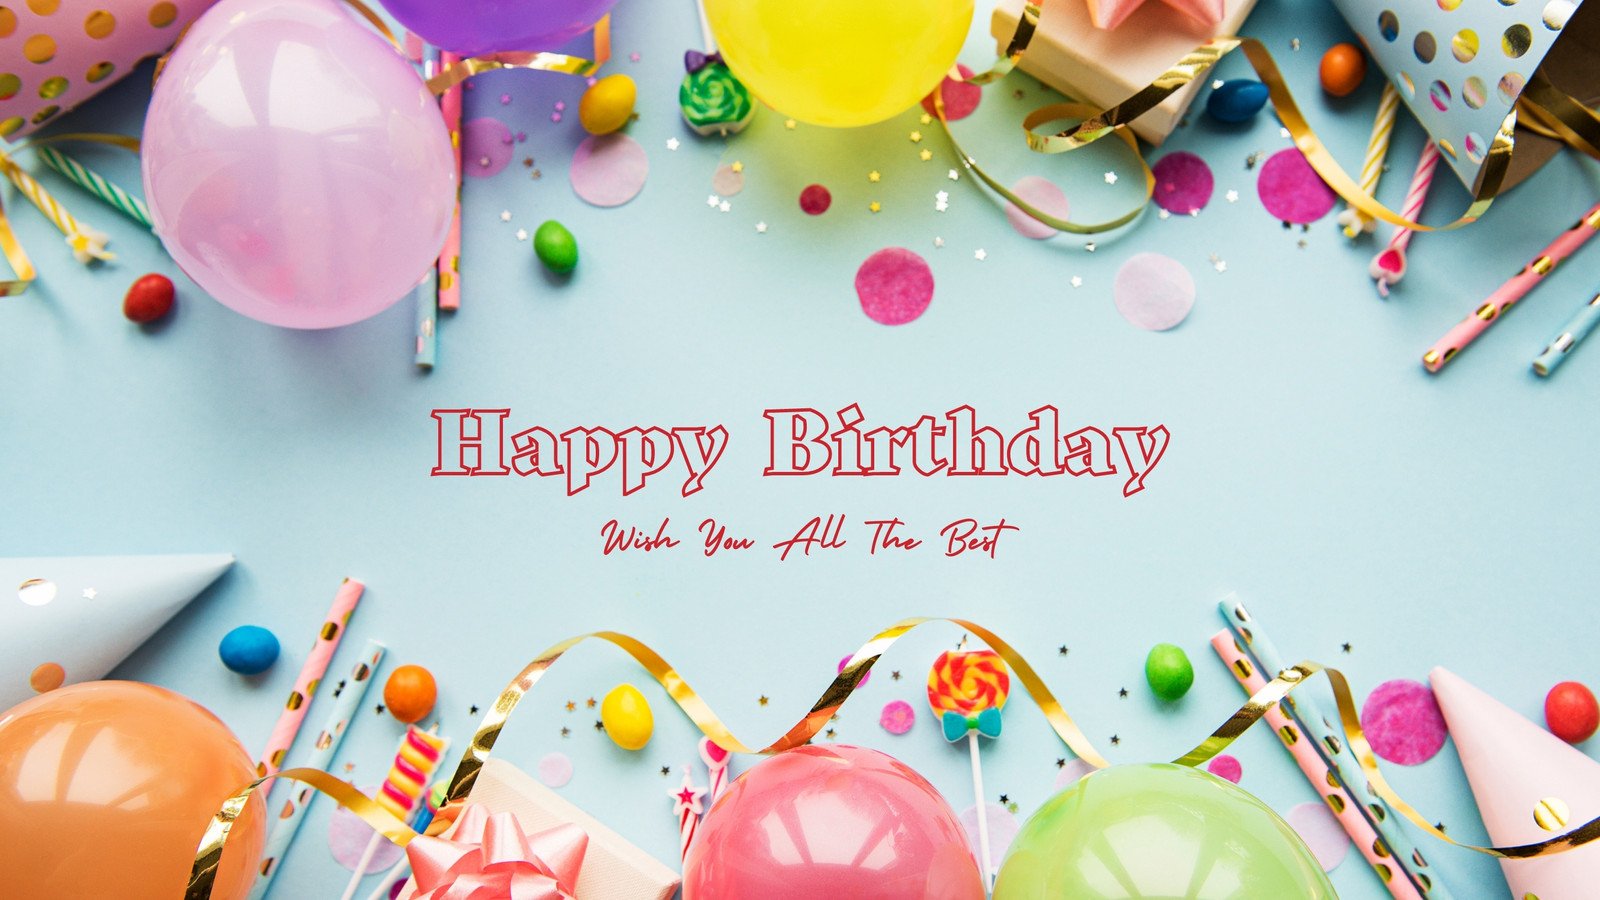 Happy Birthday Background with Balloons Graphic by rorozoagraphic   Creative Fabrica